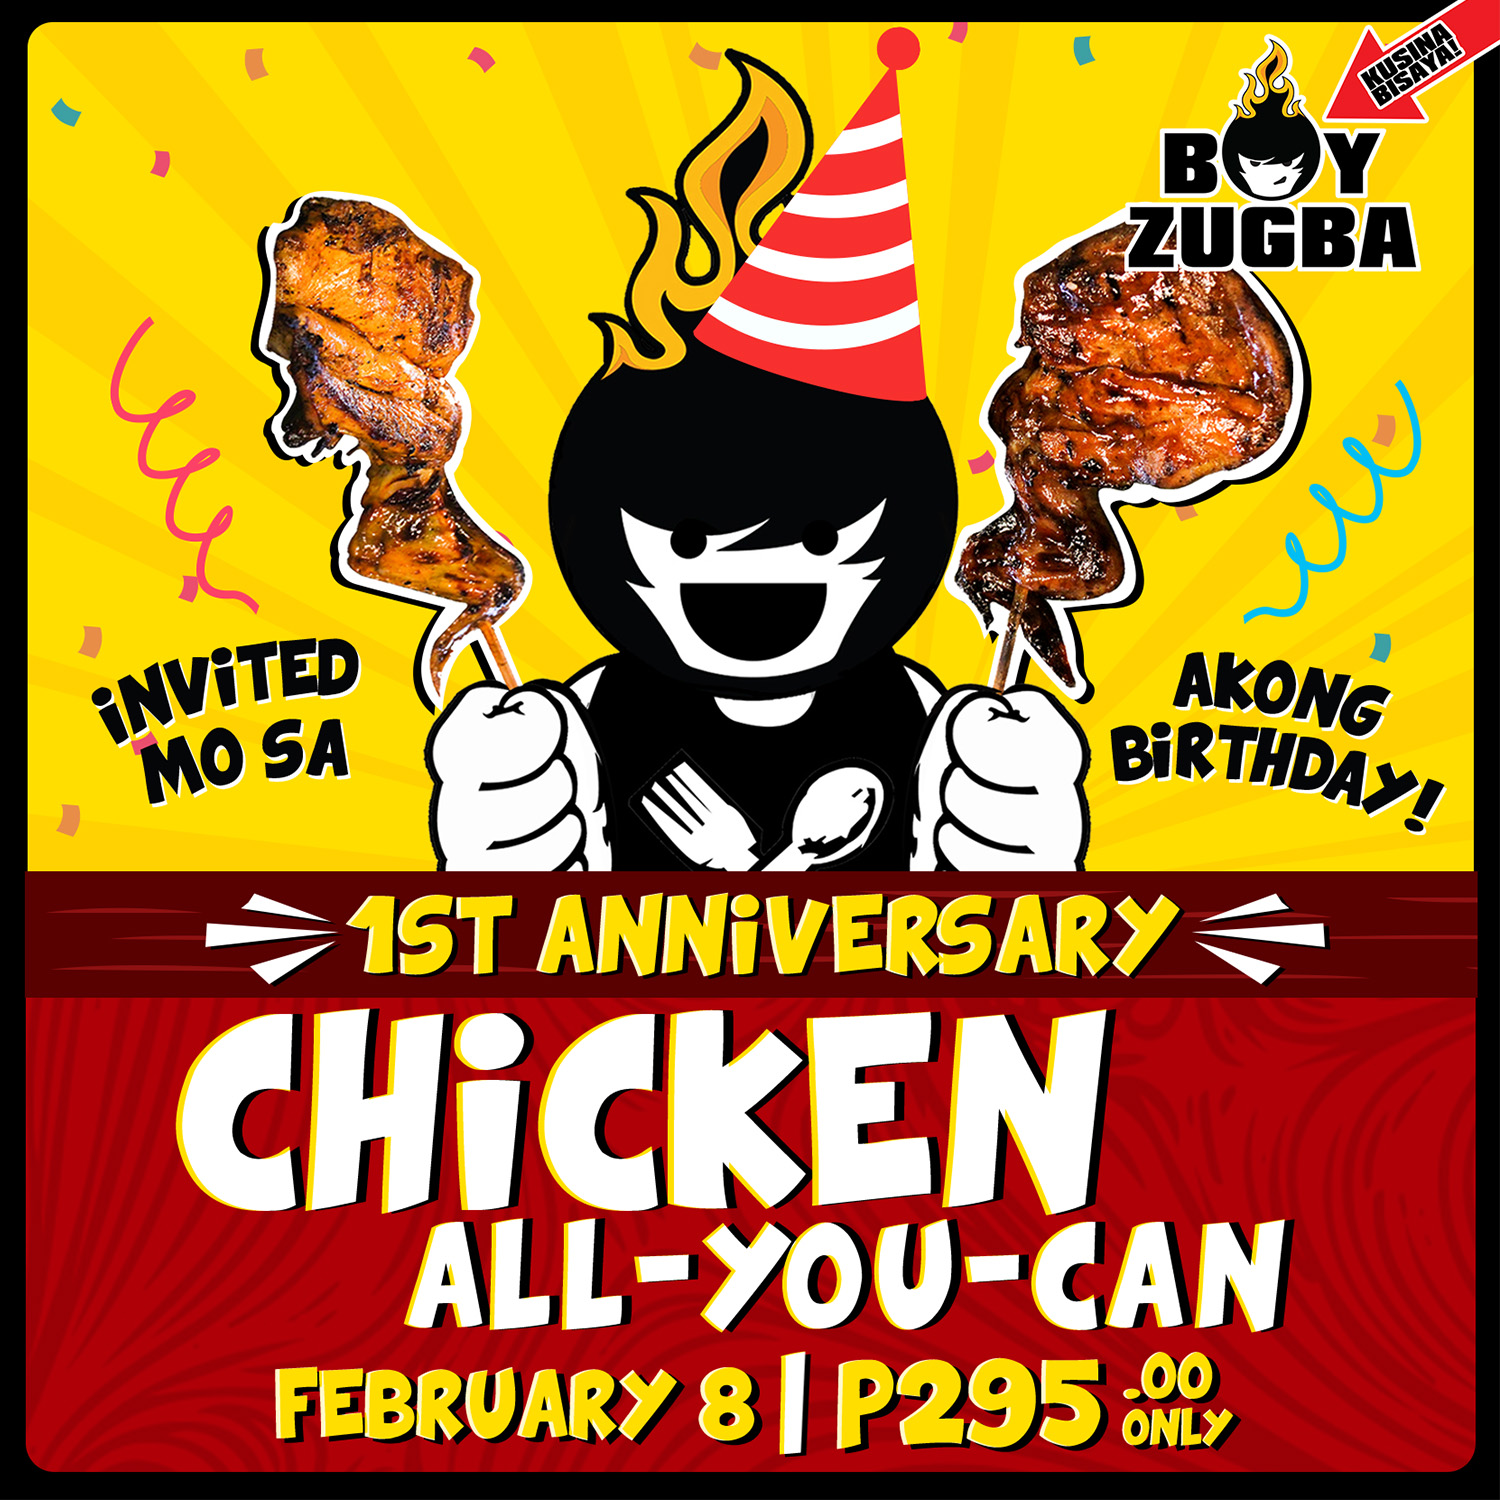 Boy Zugba 1st Anniversary Chicken All You Can - Social Media